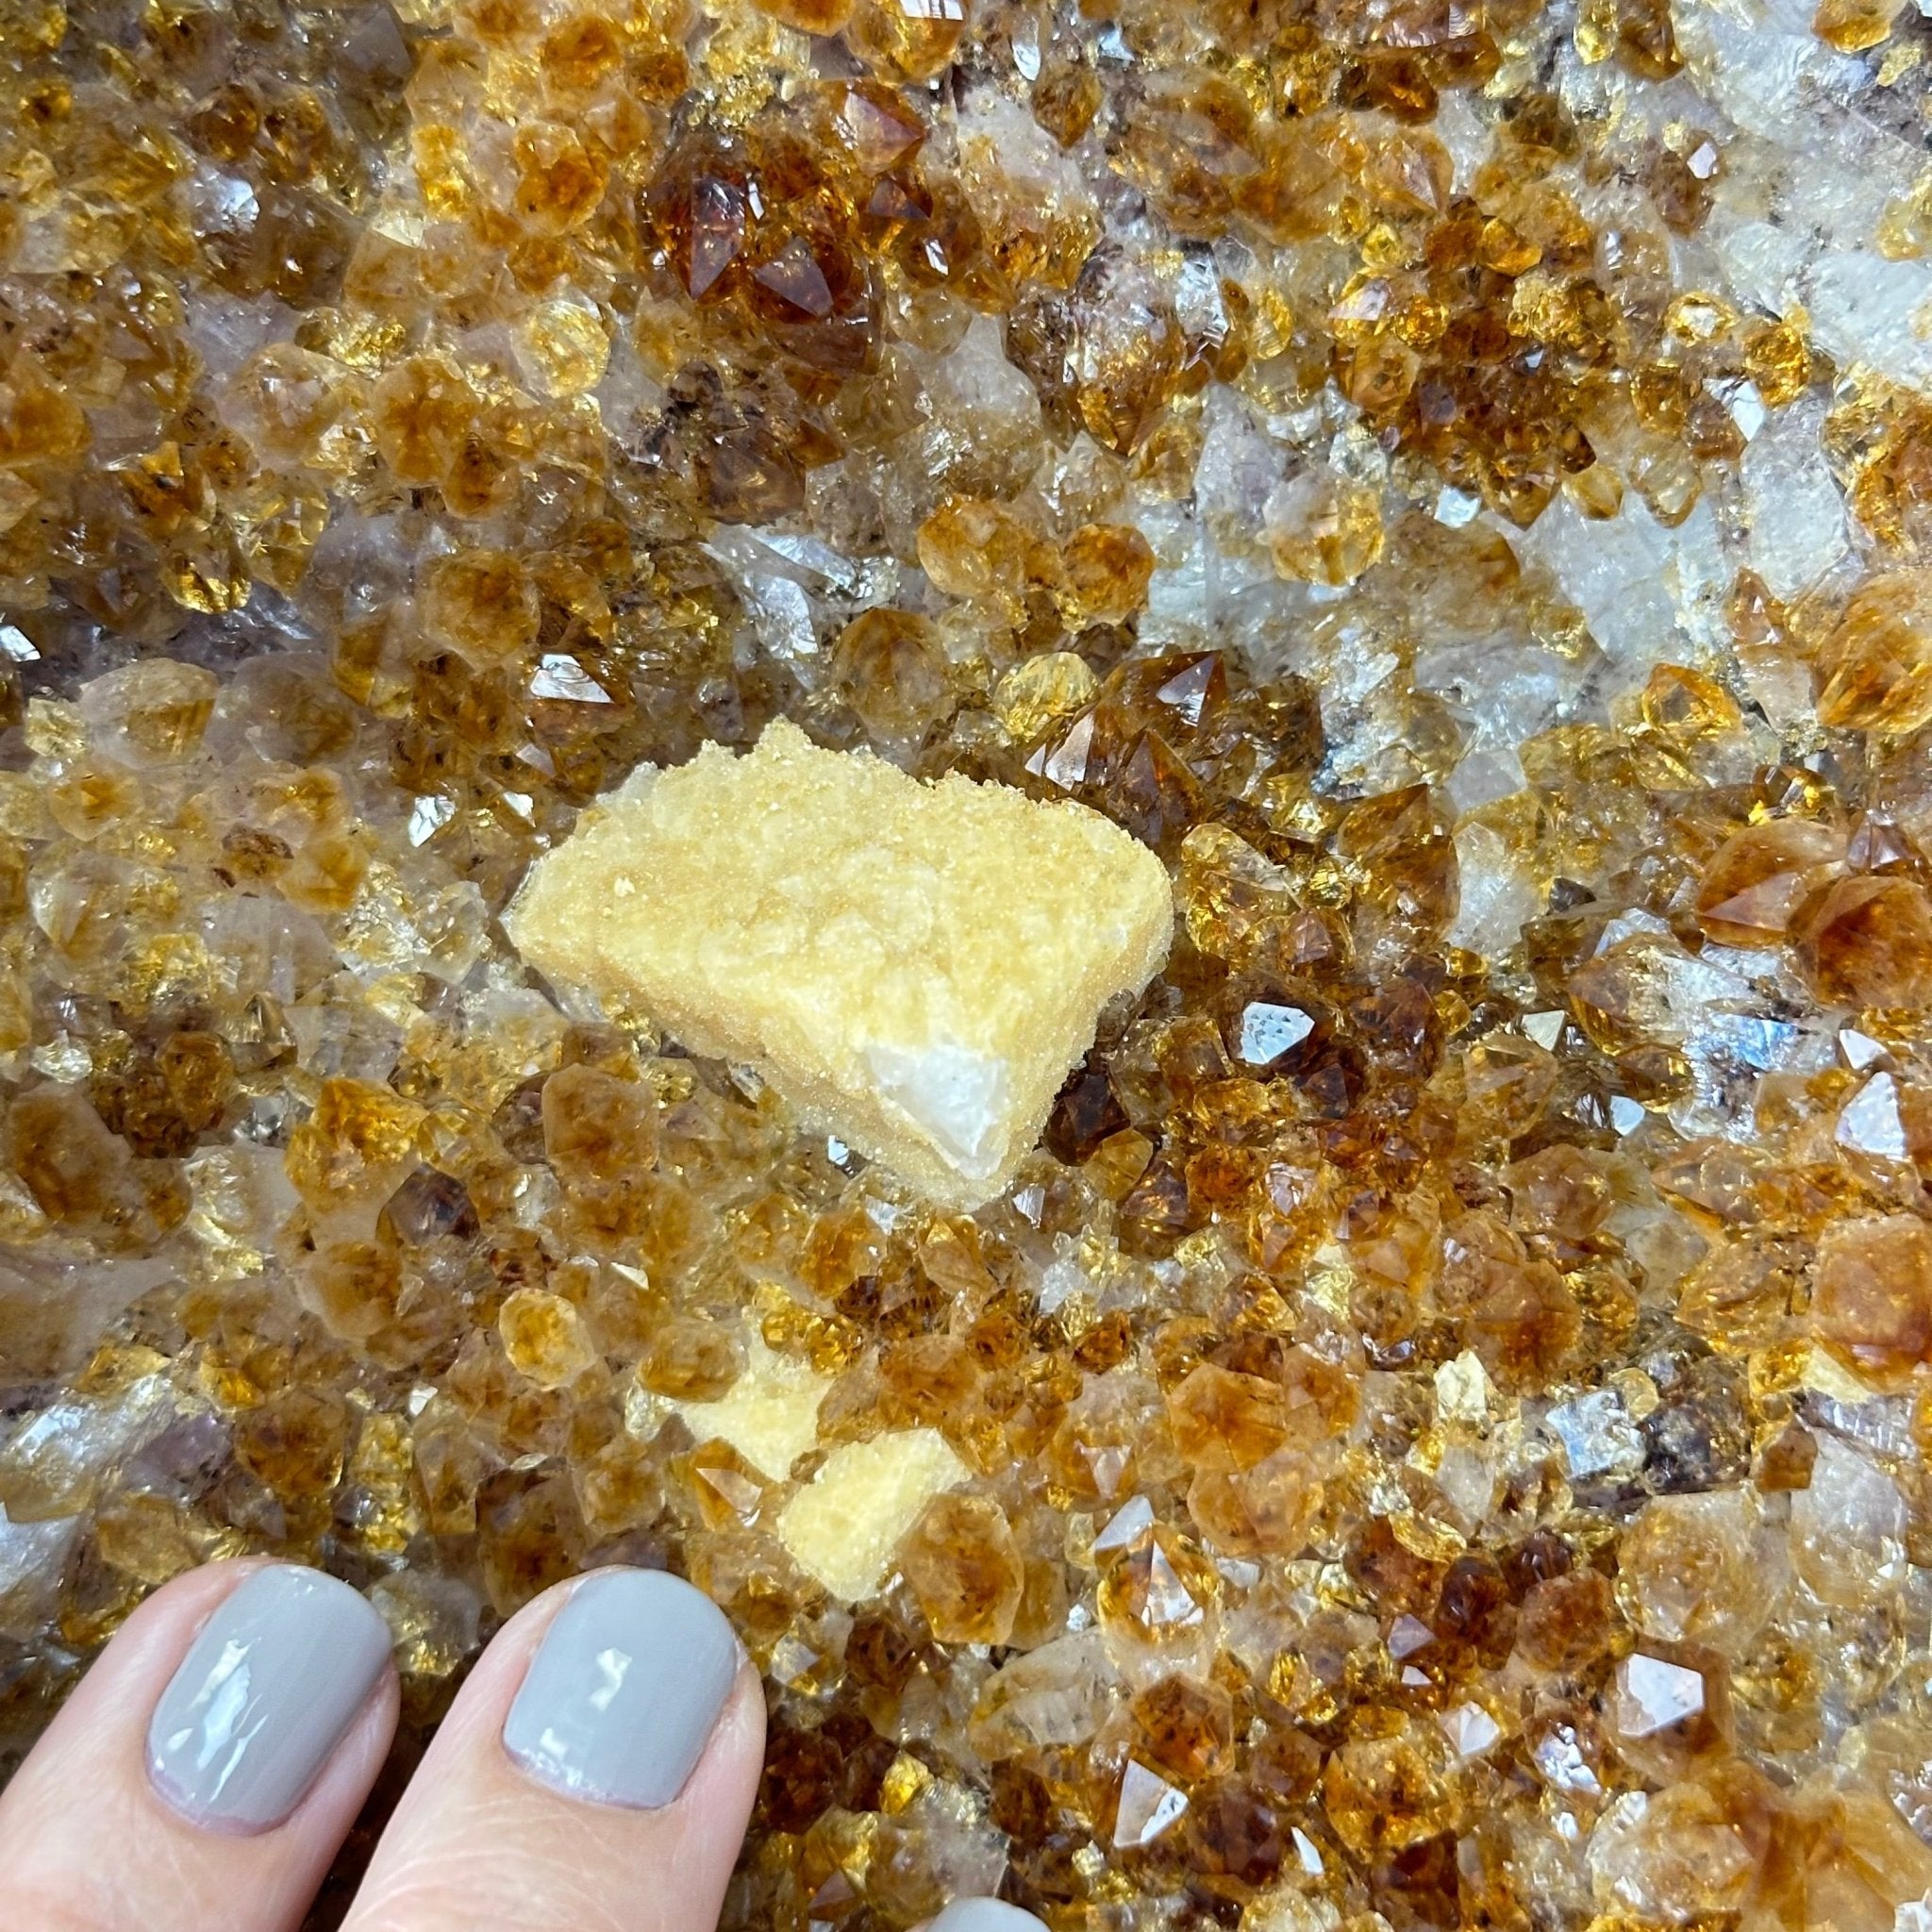 Extra Quality Citrine Cathedral, 72.3 lbs & 23.5" Tall #5603-0300 by Brazil Gems® - Brazil GemsBrazil GemsExtra Quality Citrine Cathedral, 72.3 lbs & 23.5" Tall #5603-0300 by Brazil Gems®Cathedrals5603-0300